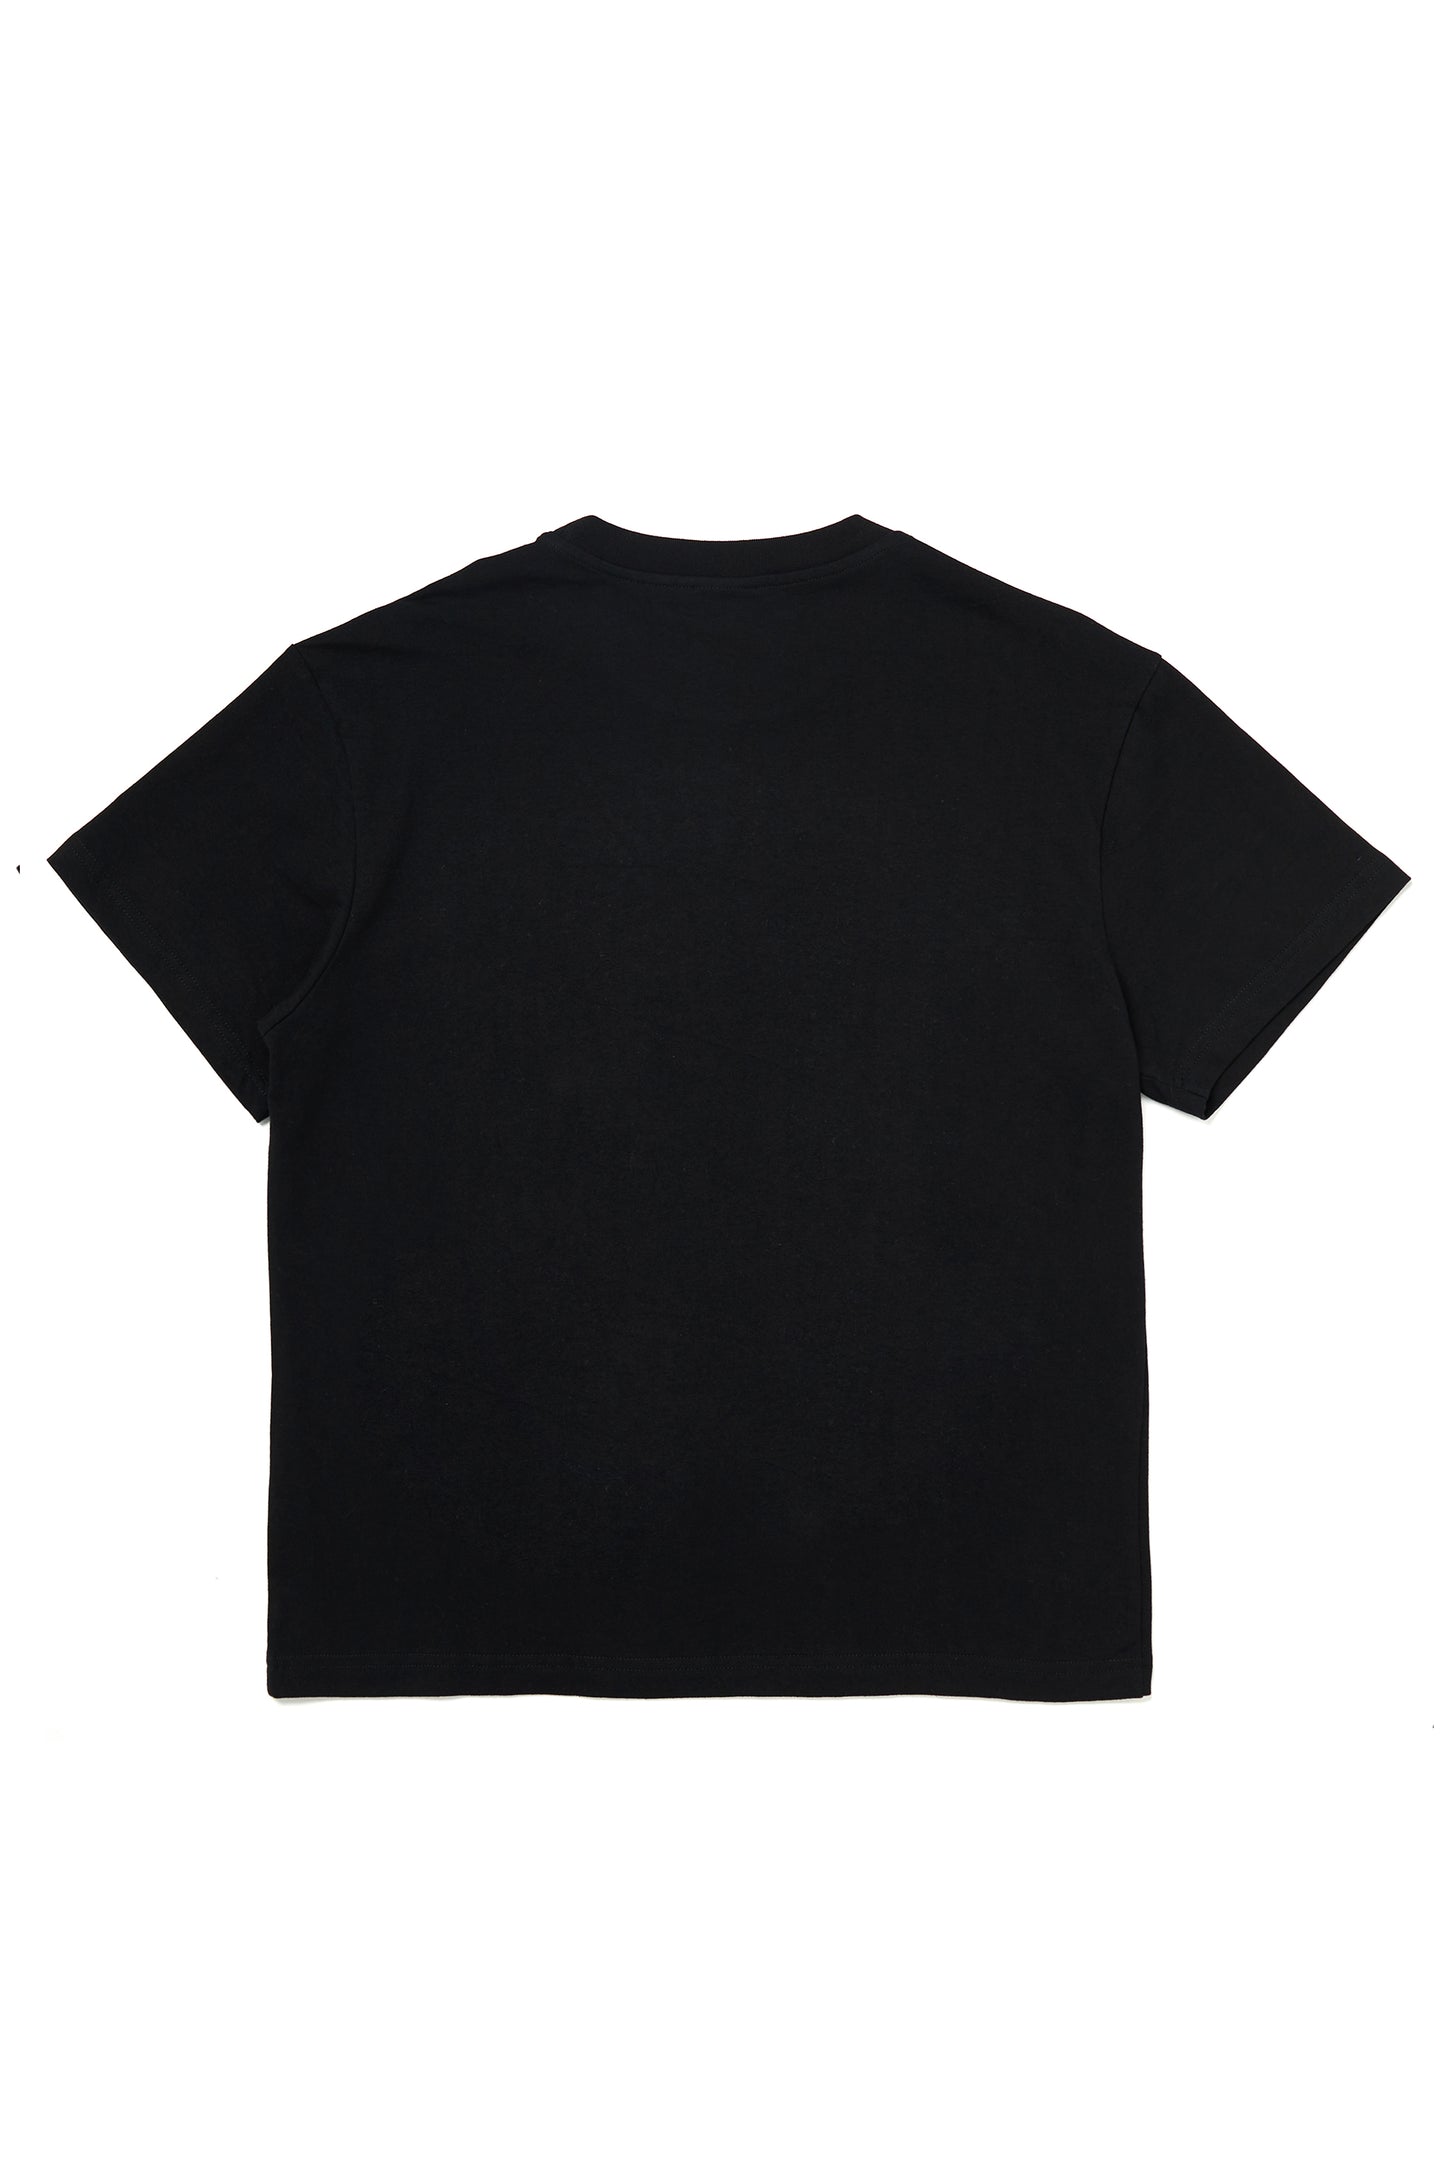 Embrace Your ShadowT-Shirt Black